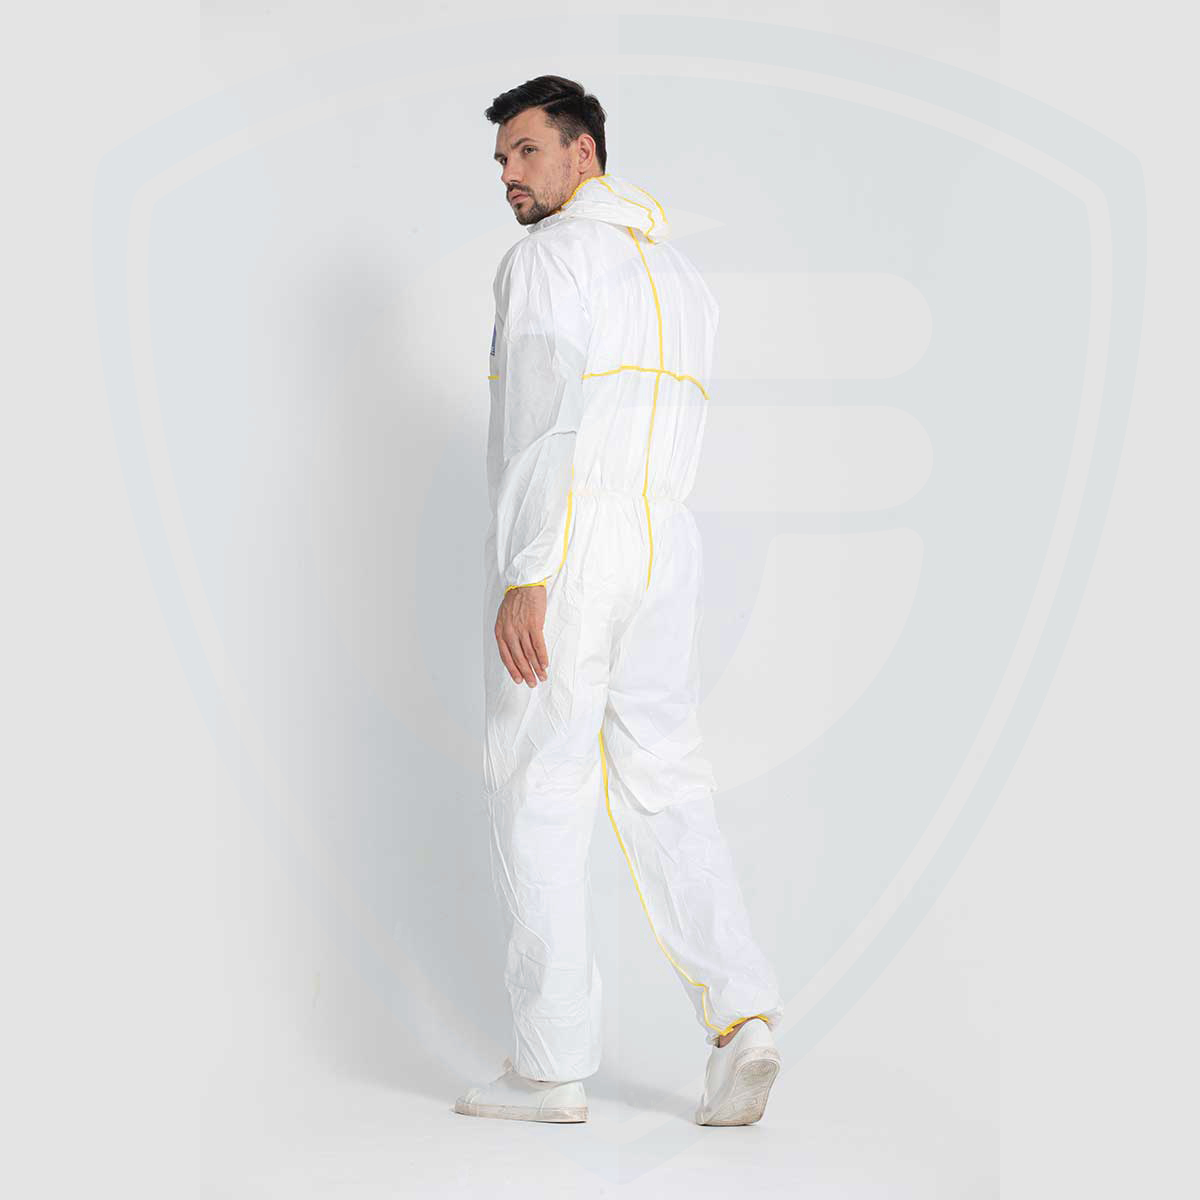 Excellent Liquid Protection Performance And Comfortable Protective Clothing Hemming Coverall